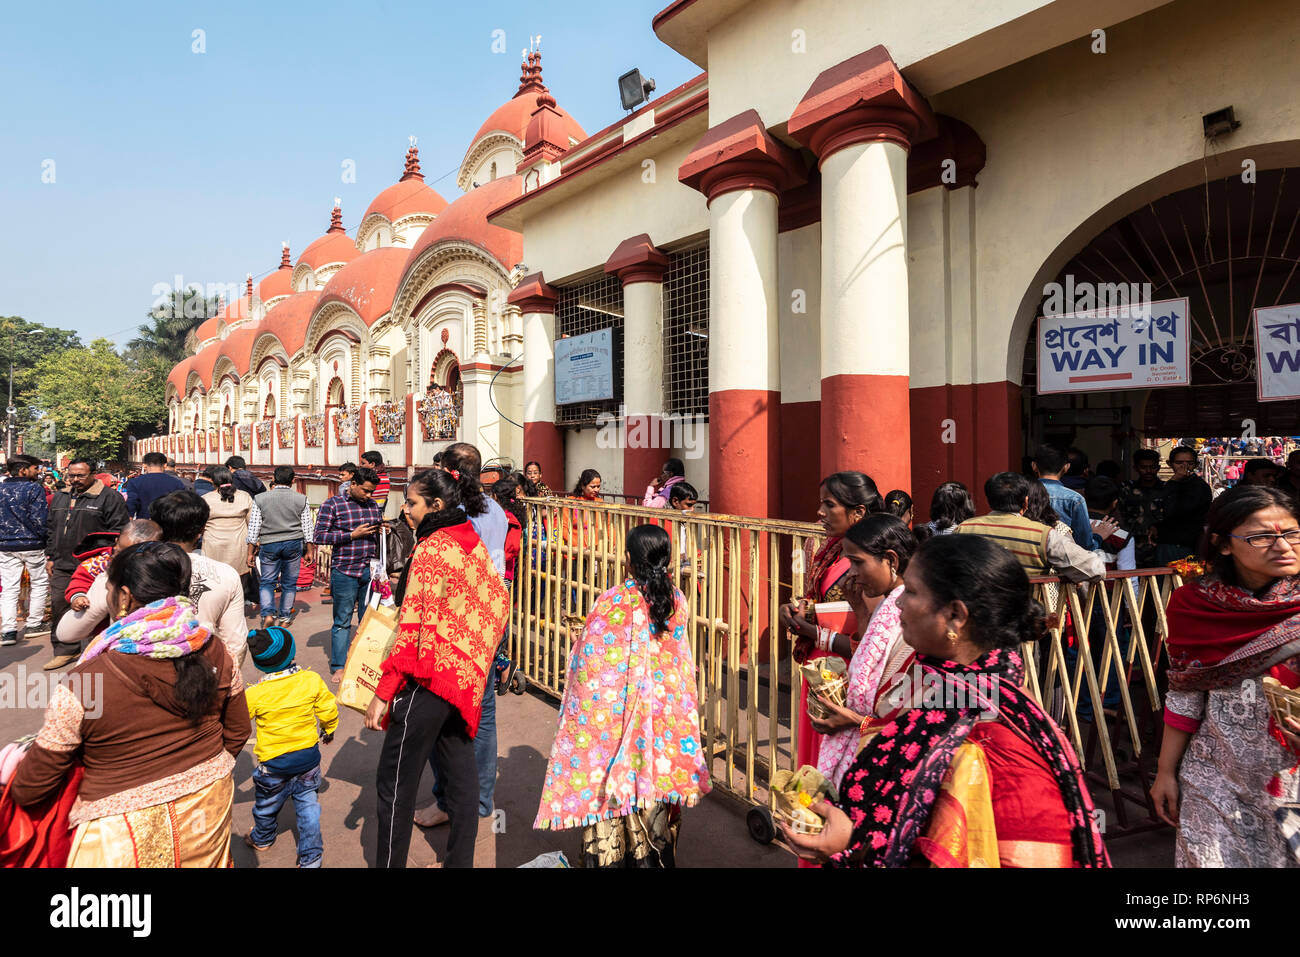 The Dakshineswar Kali Temple on the banks of the Hooghly River with local people going in and out on a sunny day with blue sky. Stock Photo